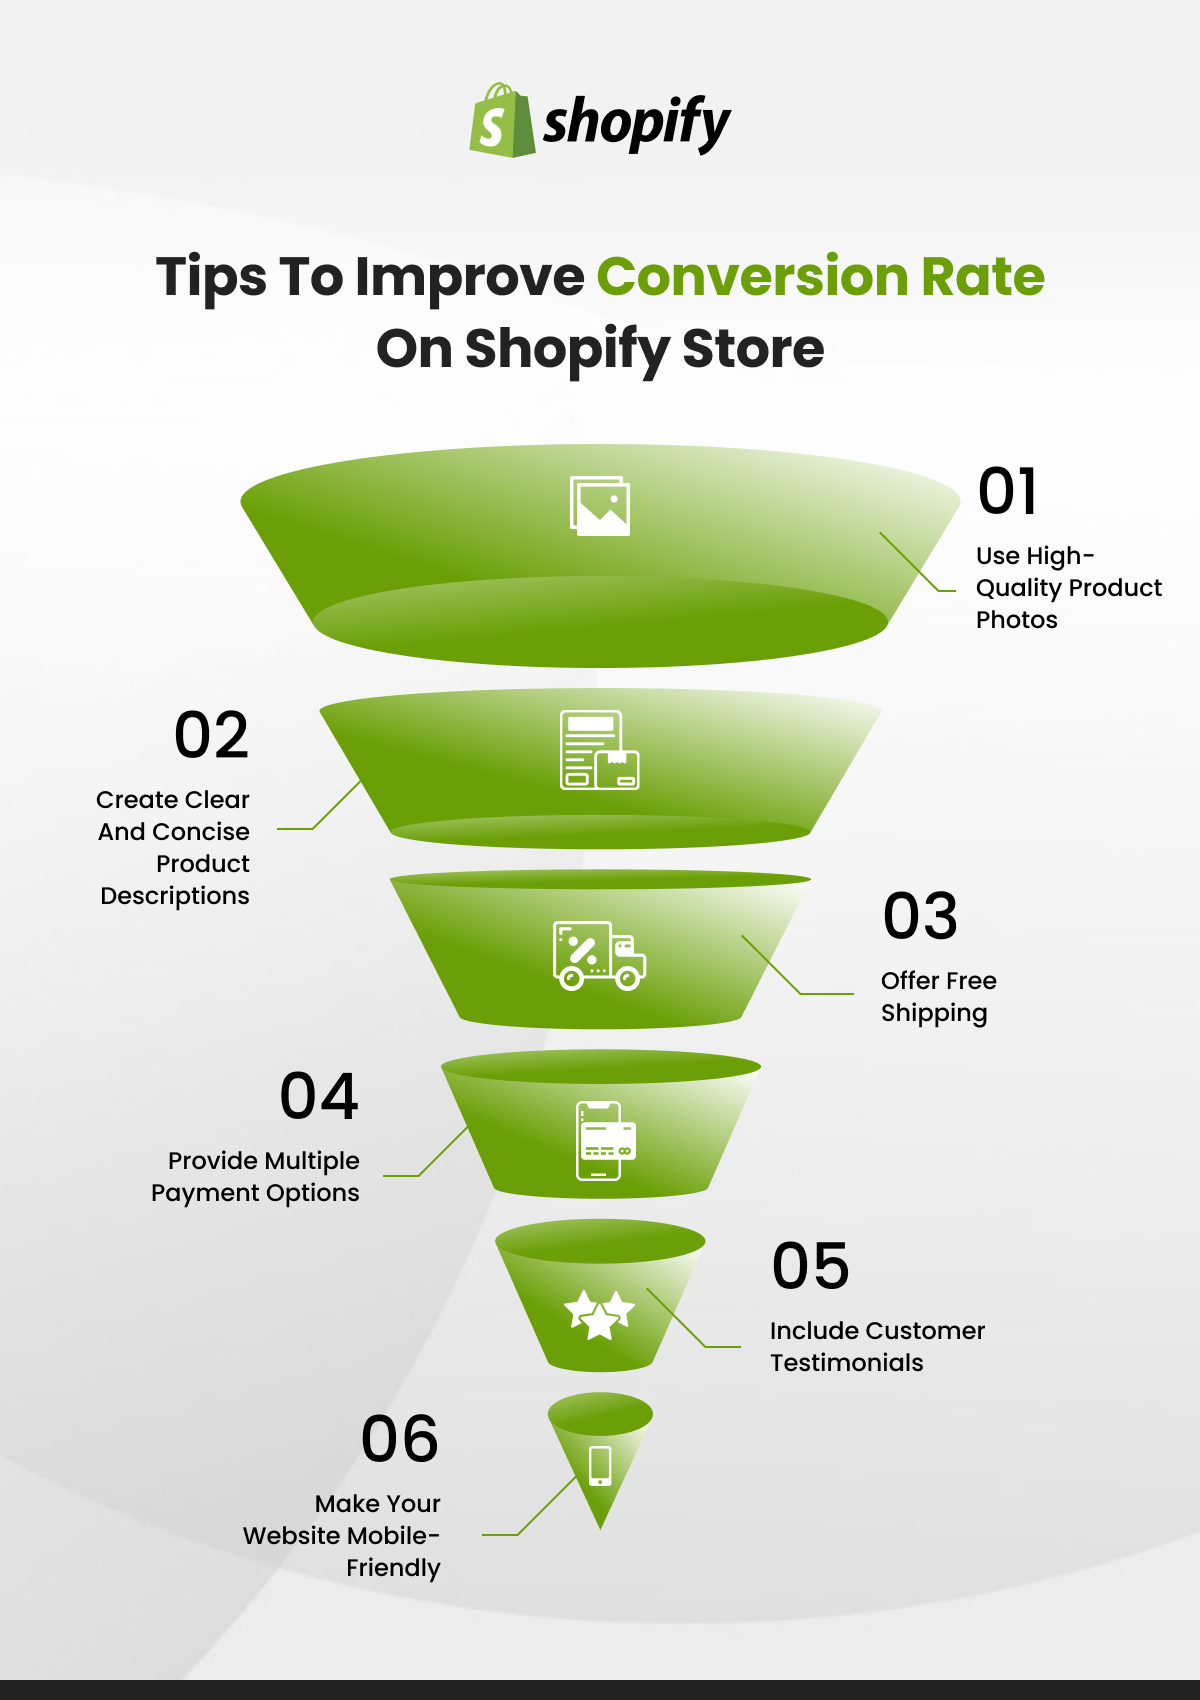 Tips to Improve Conversion Rate on Shopify Store